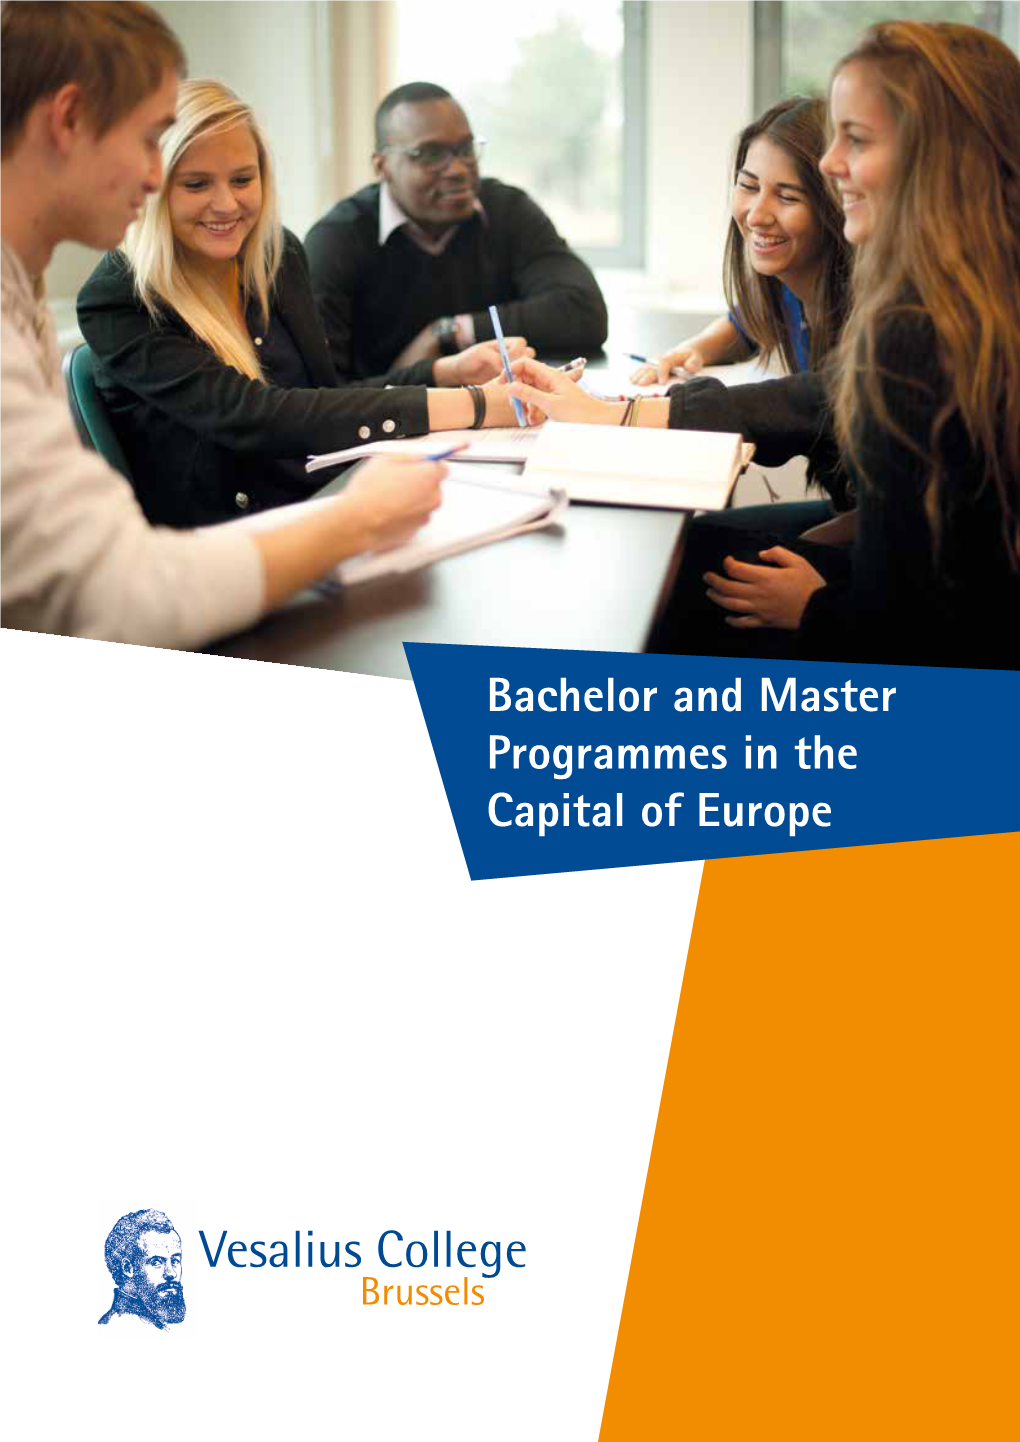 Bachelor and Master Programmes in the Capital of Europe